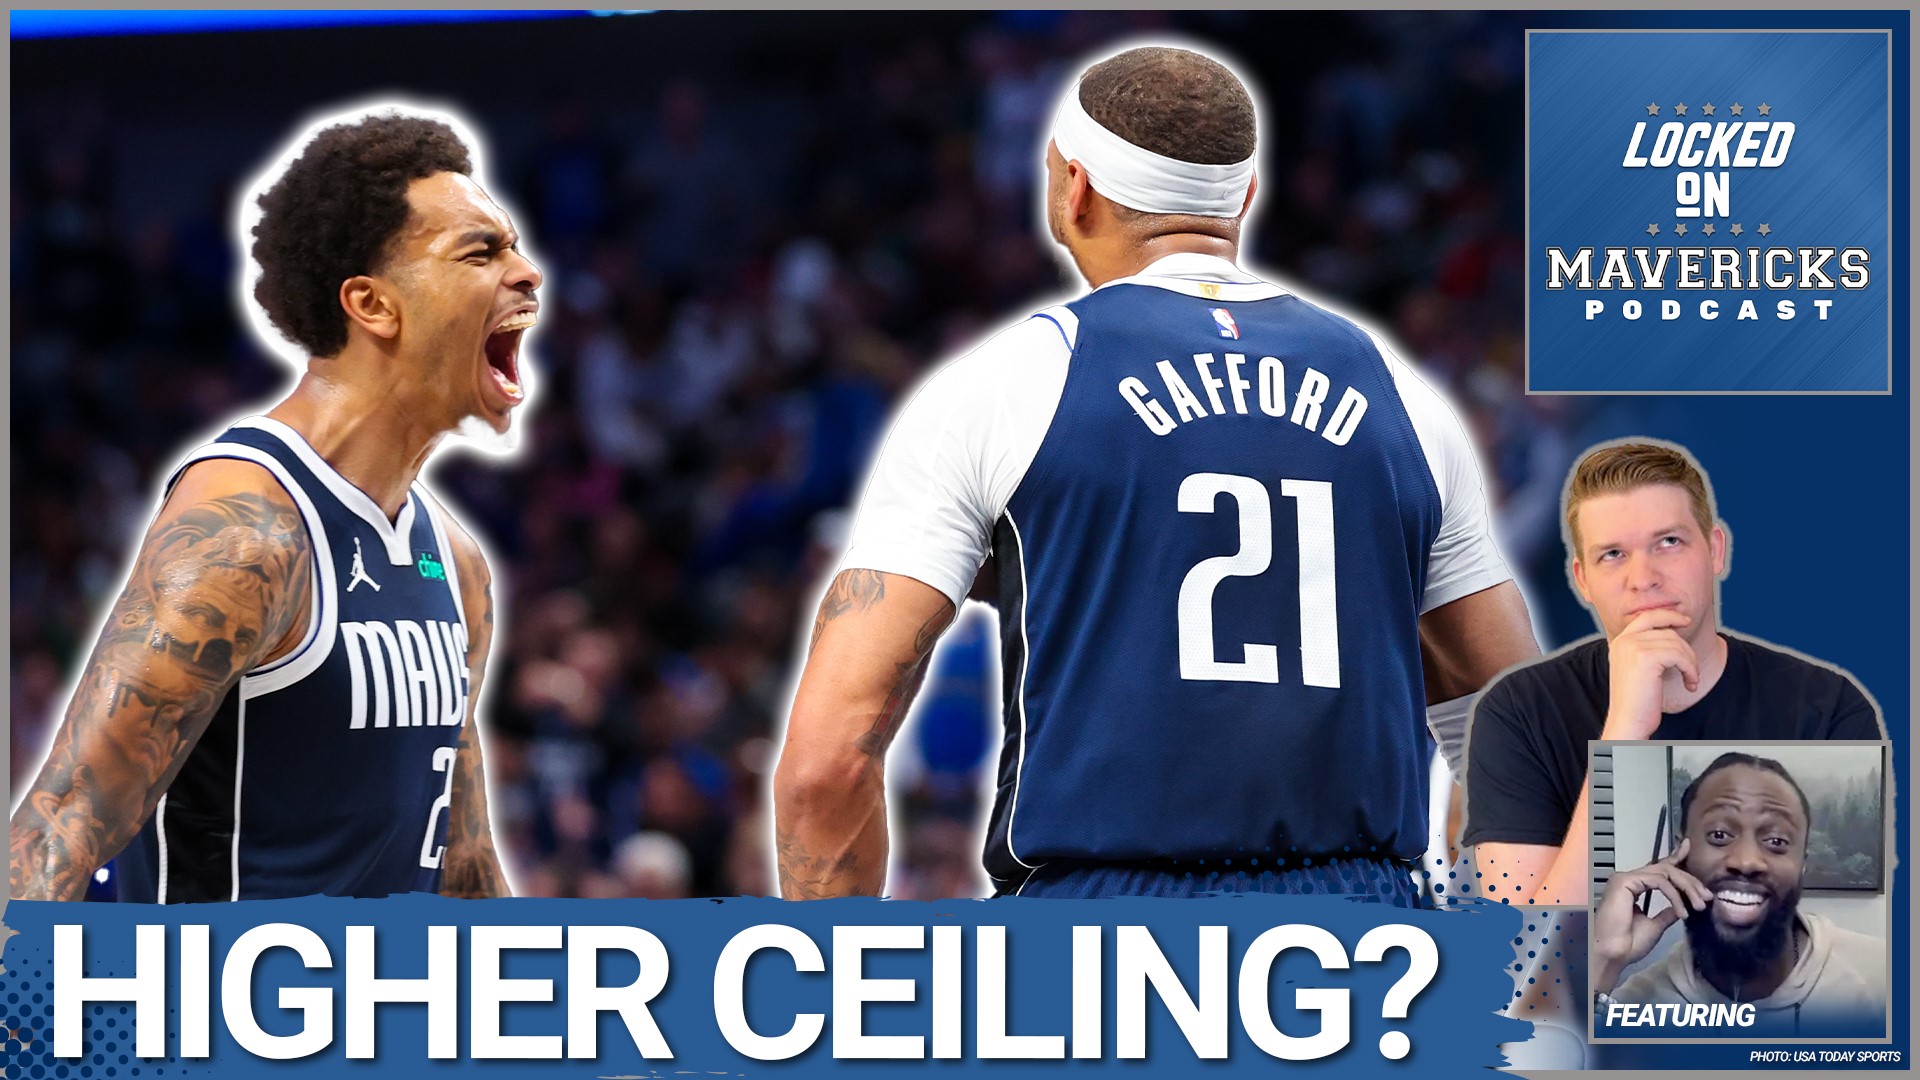 Nick Angstadt & Reggie Adetula discuss how PJ Washington and Daniel Gafford have changed how the Dallas Mavericks play and what the Mavs ceiling could be.